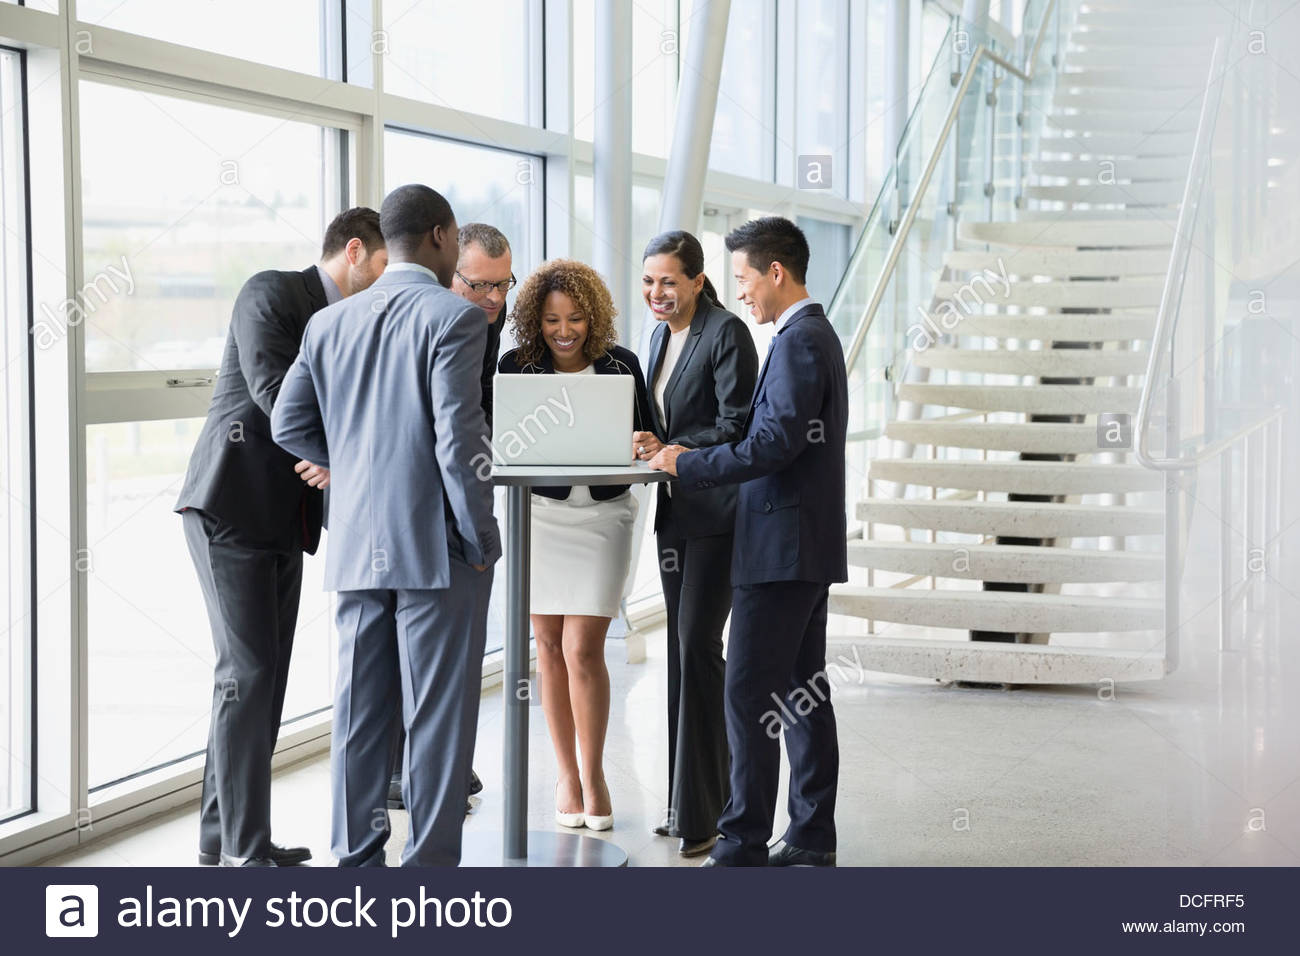 group-of-business-people-discussing-over-laptop-DCFRF5.jpg